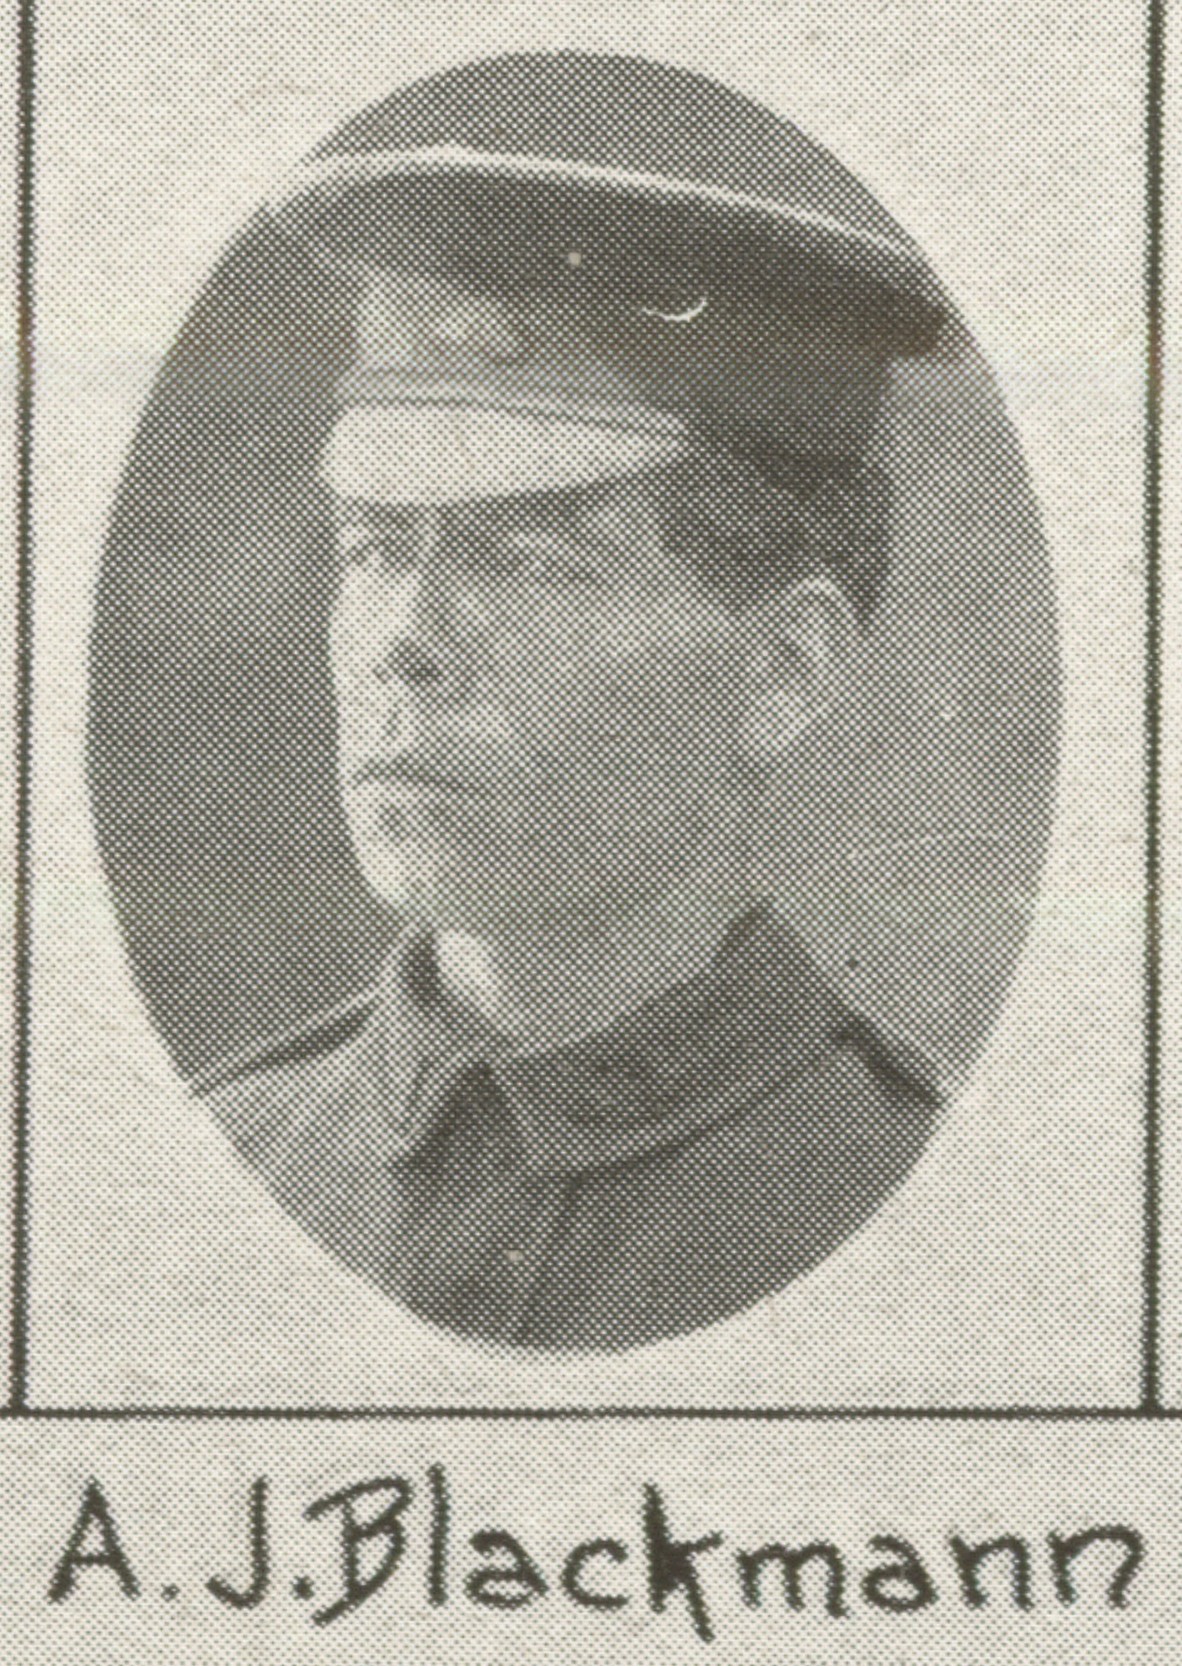 AJ Blackmann one of the soldiers photographed in The Queenslander Pictorial supplement to The Queenslander 1917